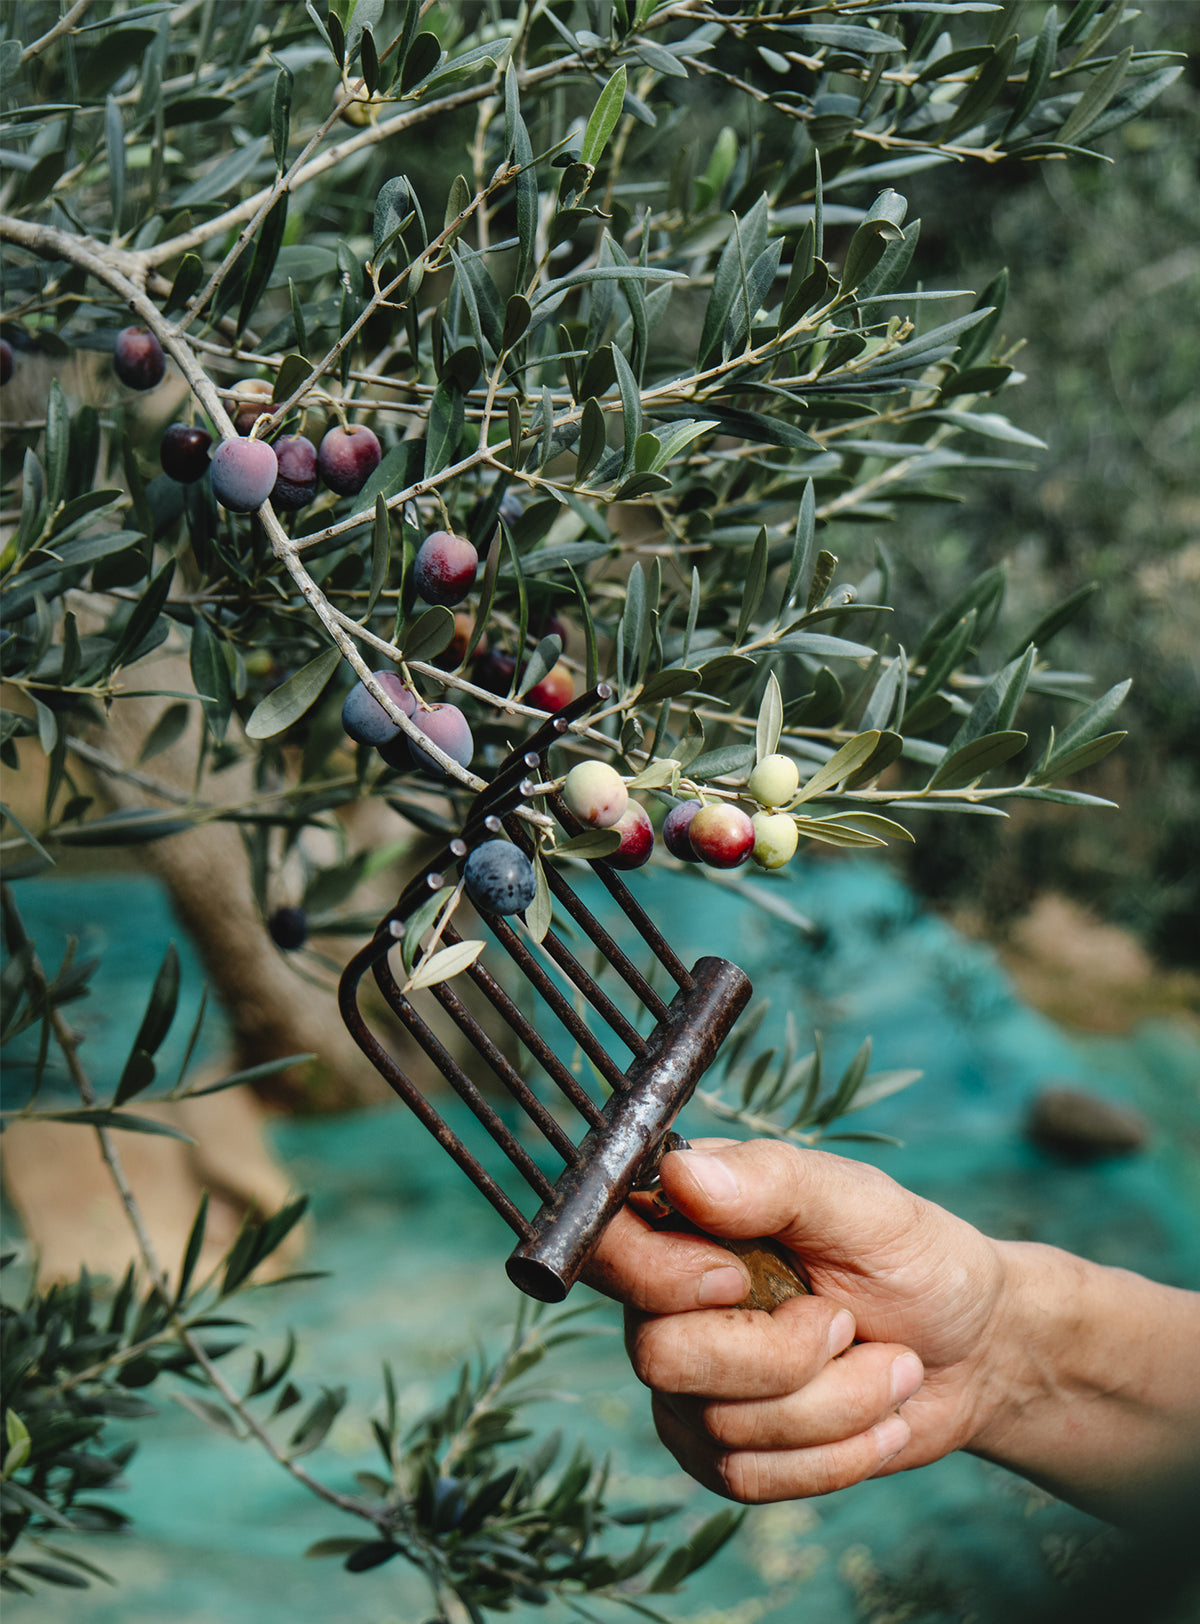 A person holding a metal rake over an Arbequina olive tree.